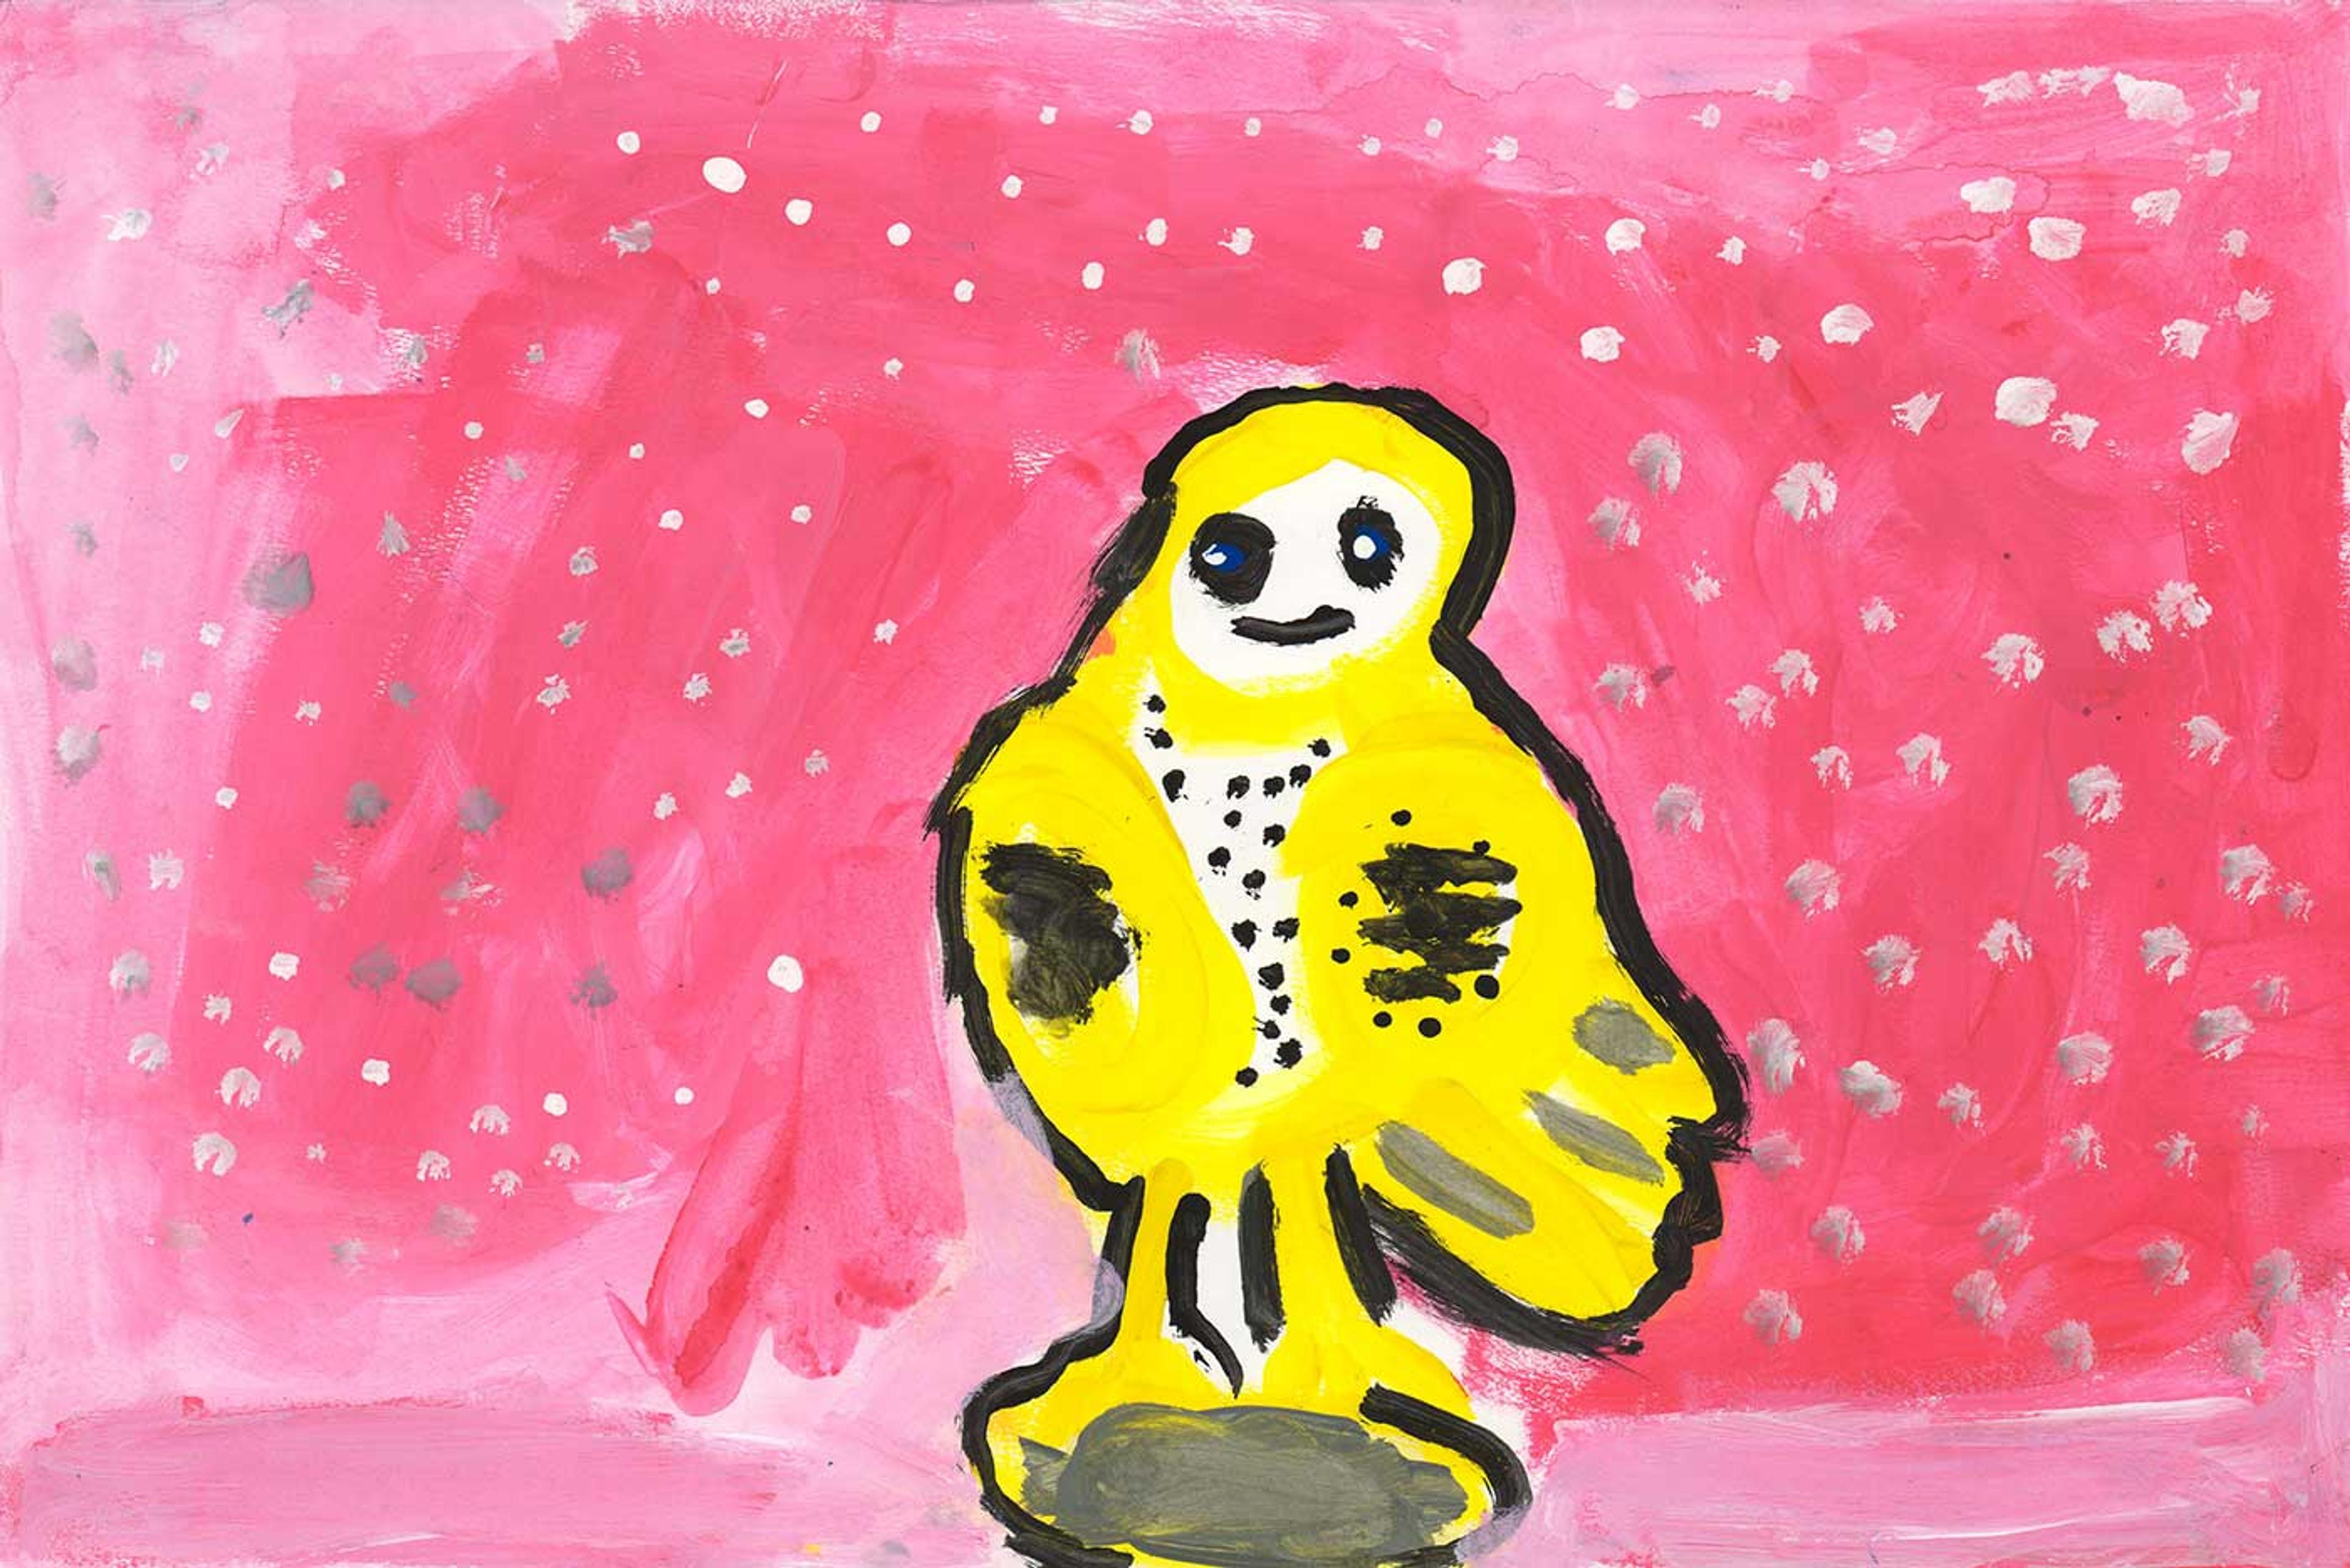 Painting of a yellow owl on a pink background with white dots.